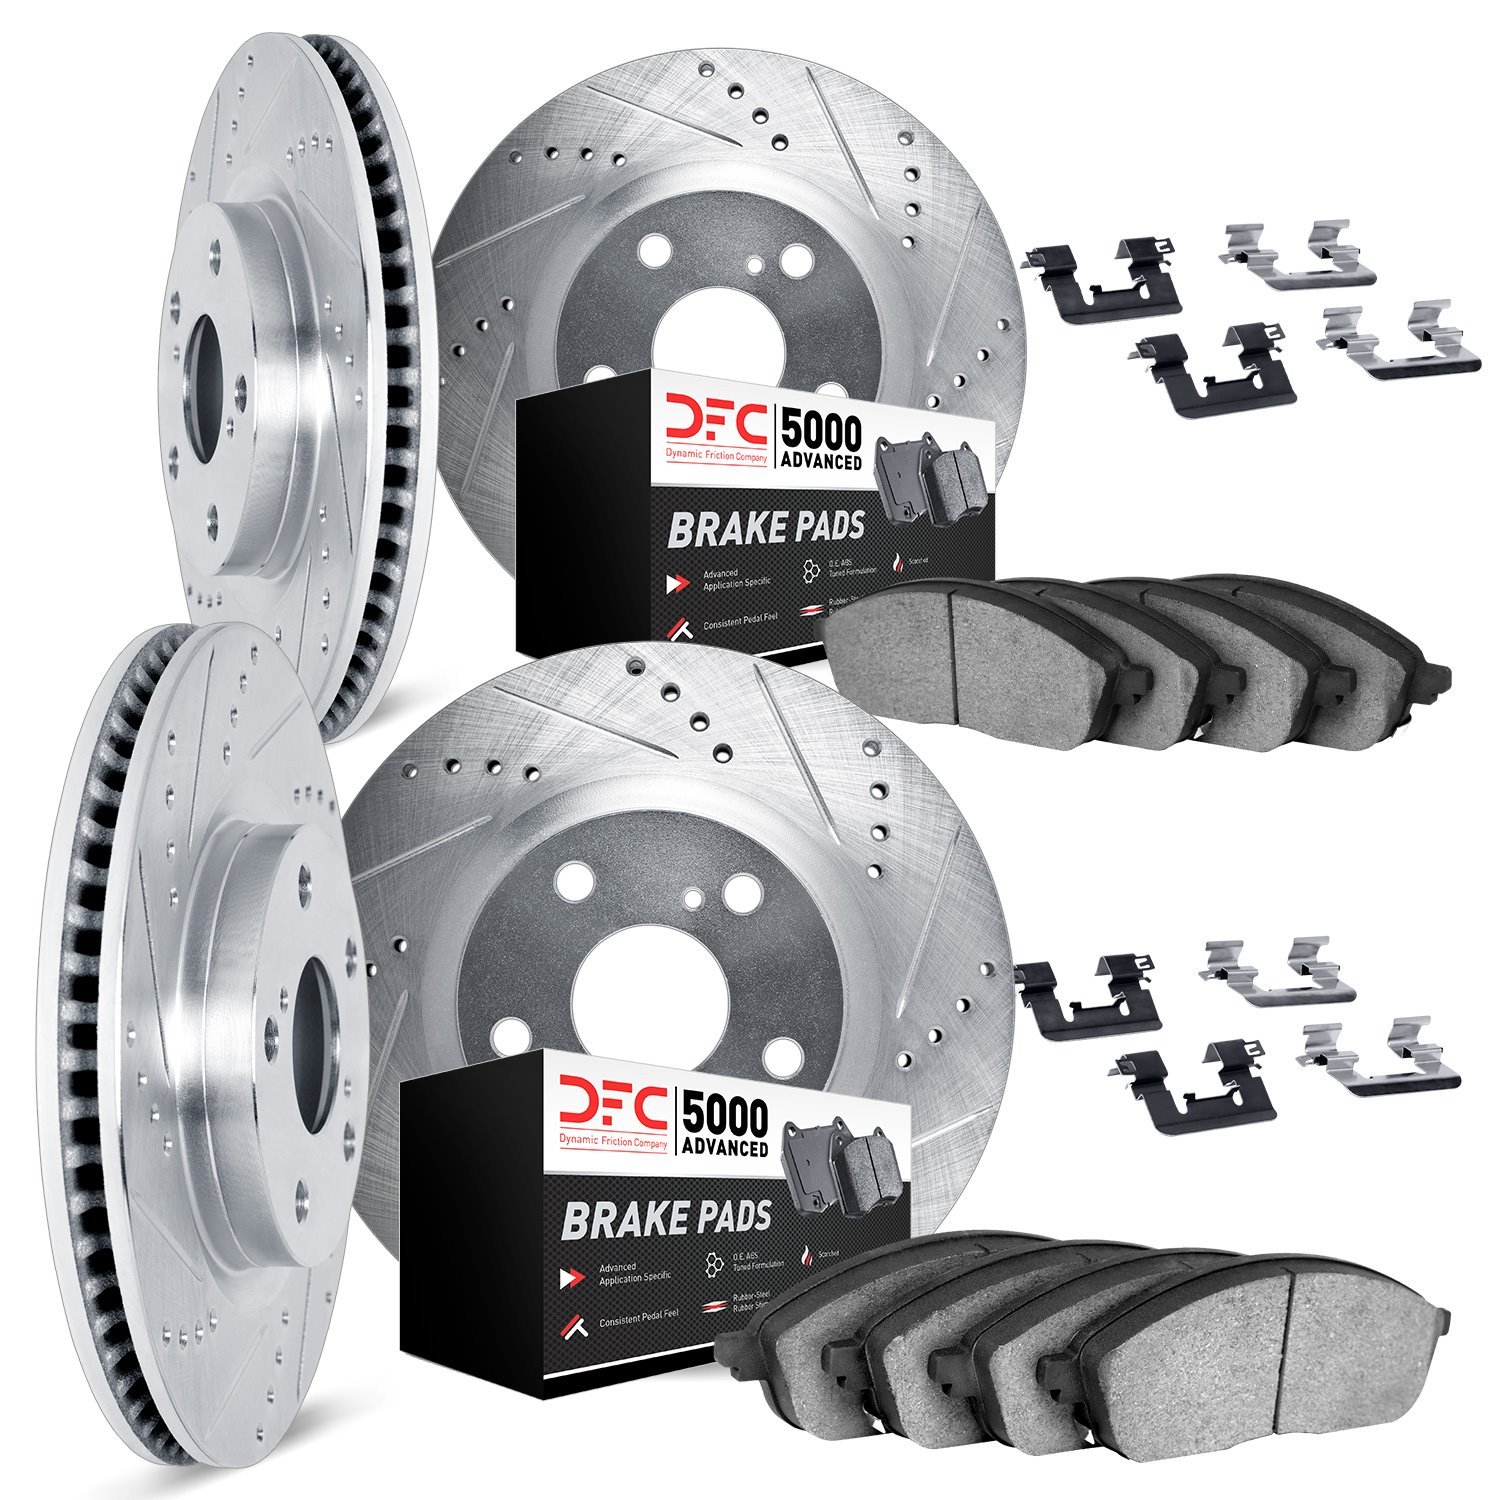 7514-31041 Drilled/Slotted Brake Rotors w/5000 Advanced Brake Pads Kit & Hardware [Silver], 2004-2006 BMW, Position: Front and R